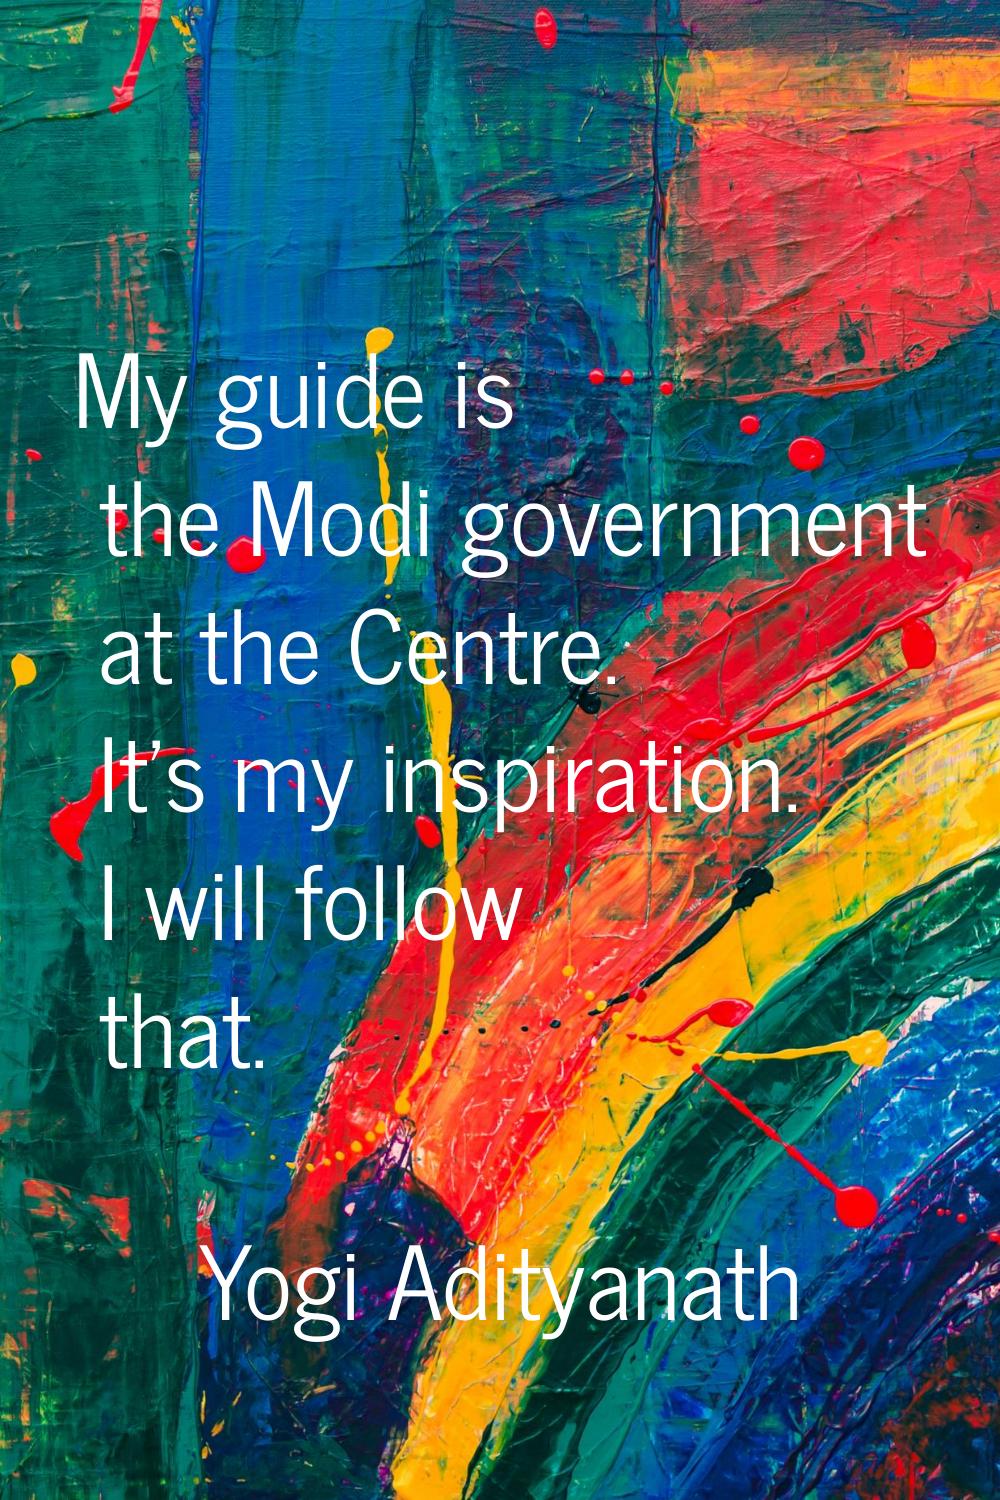 My guide is the Modi government at the Centre. It's my inspiration. I will follow that.